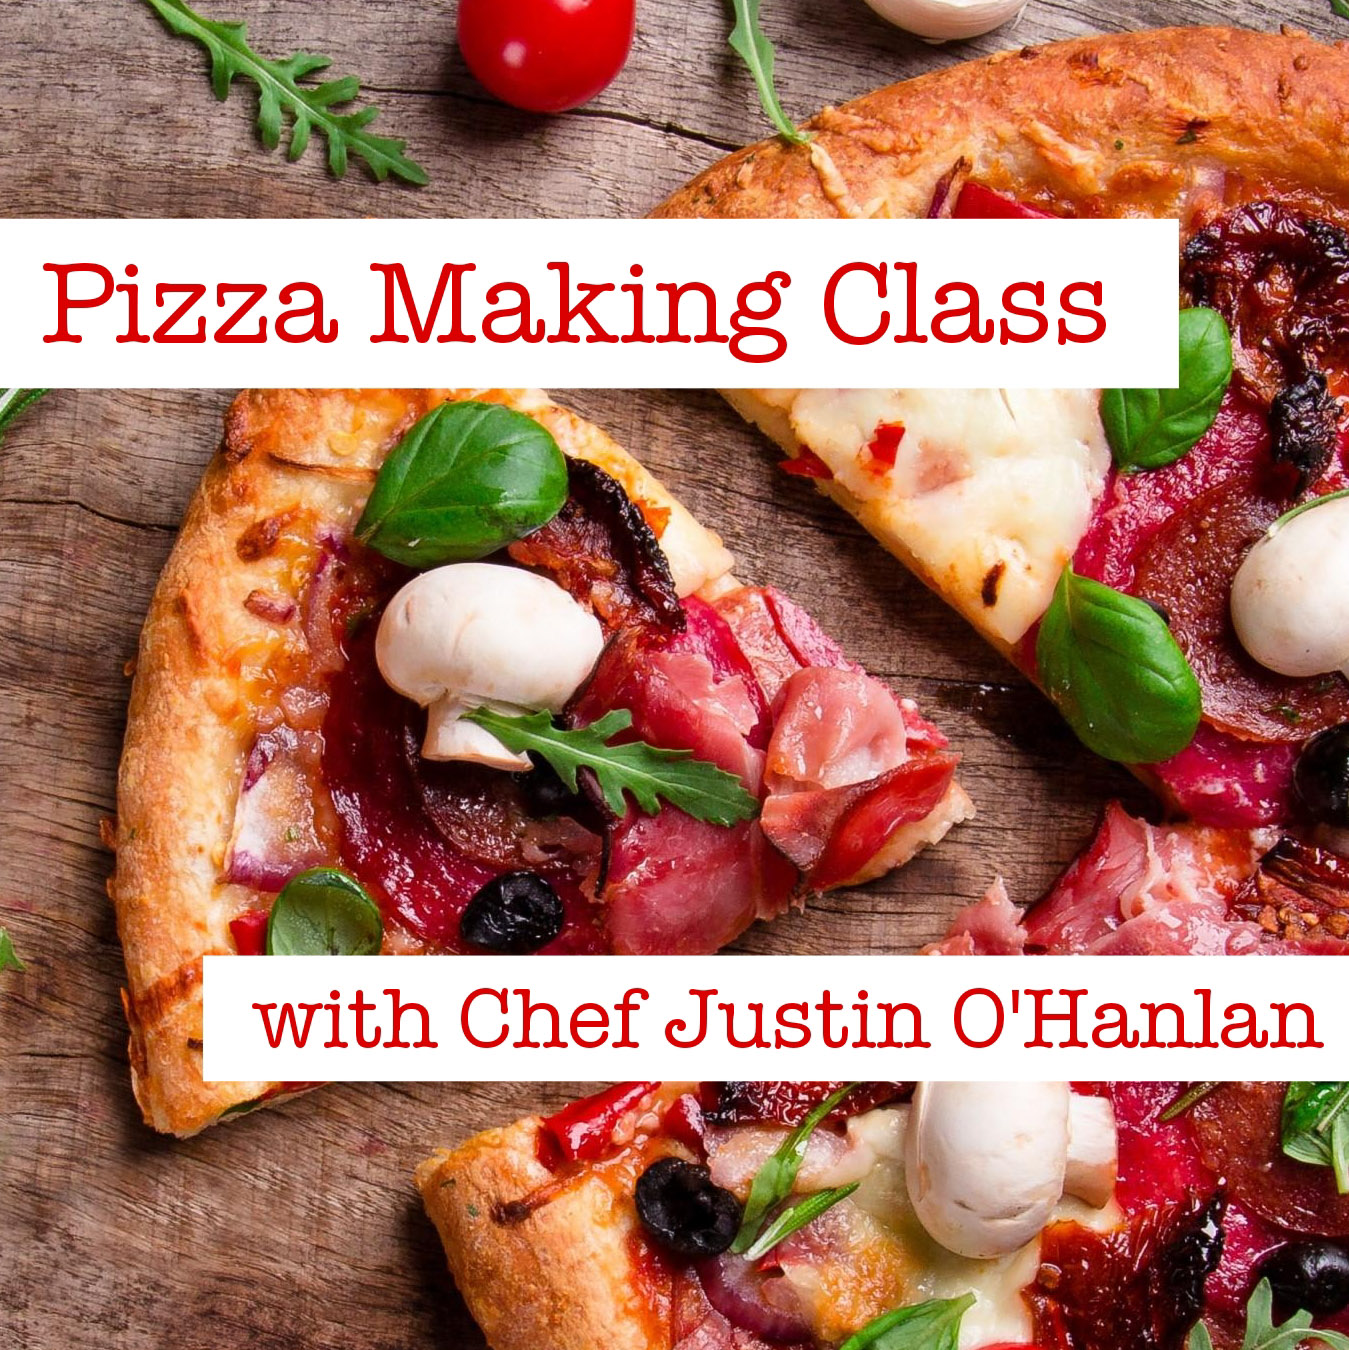 Philadelphia Philly cooking class classes pizza making 